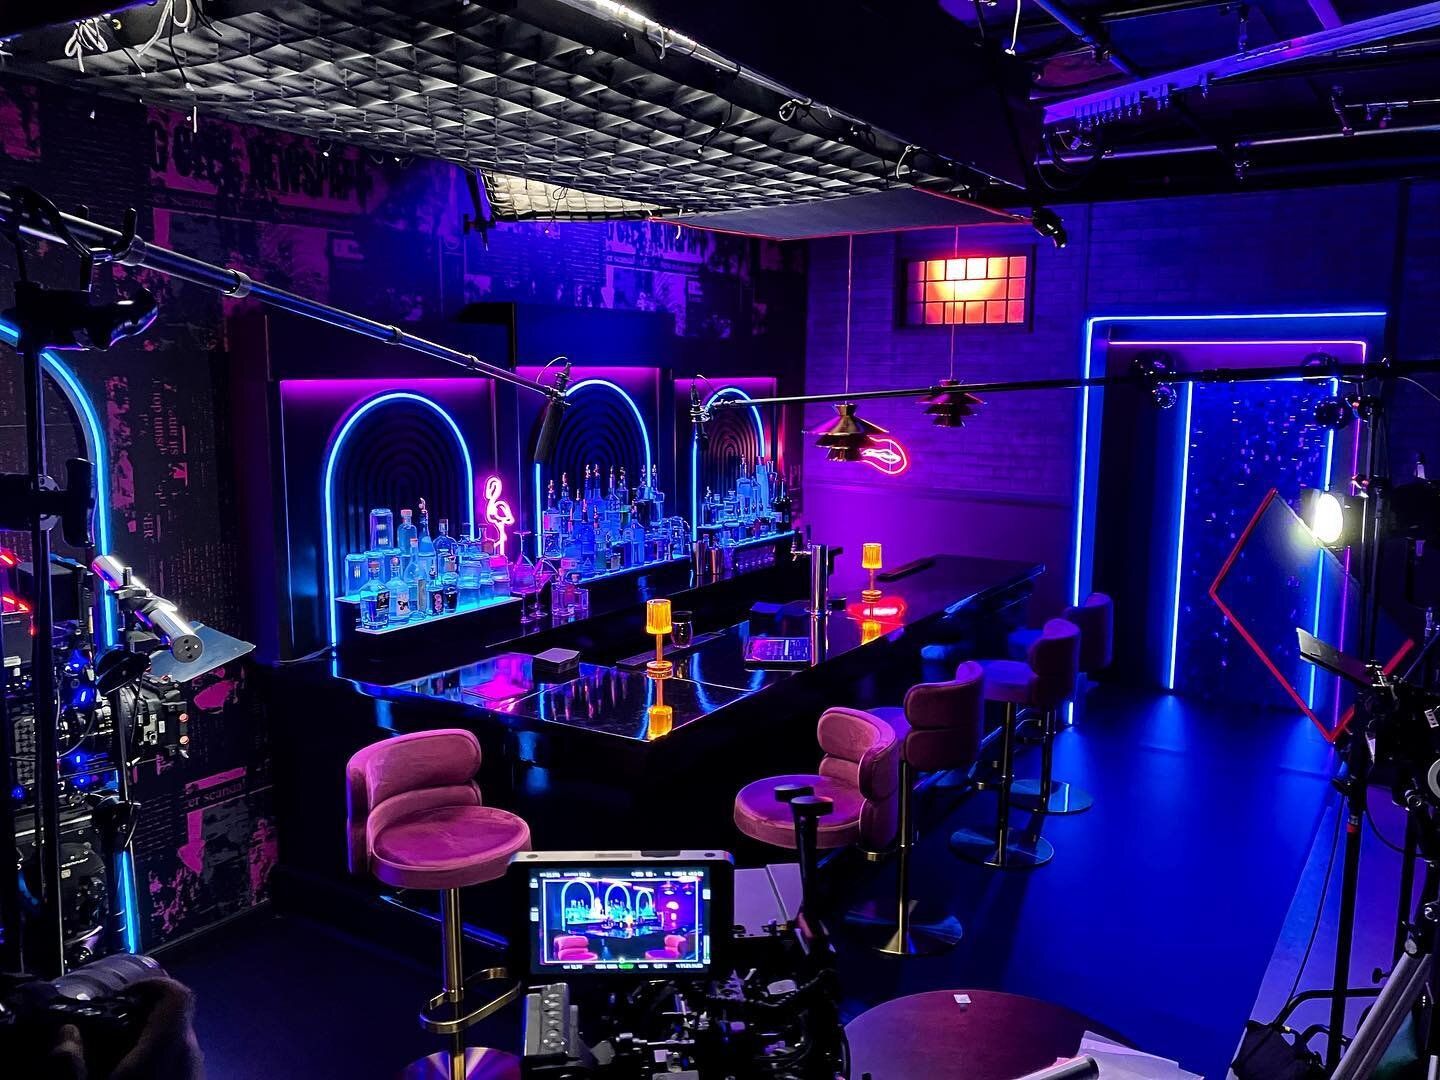 This set is lit! Sets &amp; Effects designed and built the set for season 3 of Logo Spill with @johnnysibilly . Pull up a bar stool and catch the latest from @logotv on YouTube now! 

#setsandeffects #sets #setdesign #setdesigner #setconstruction #de